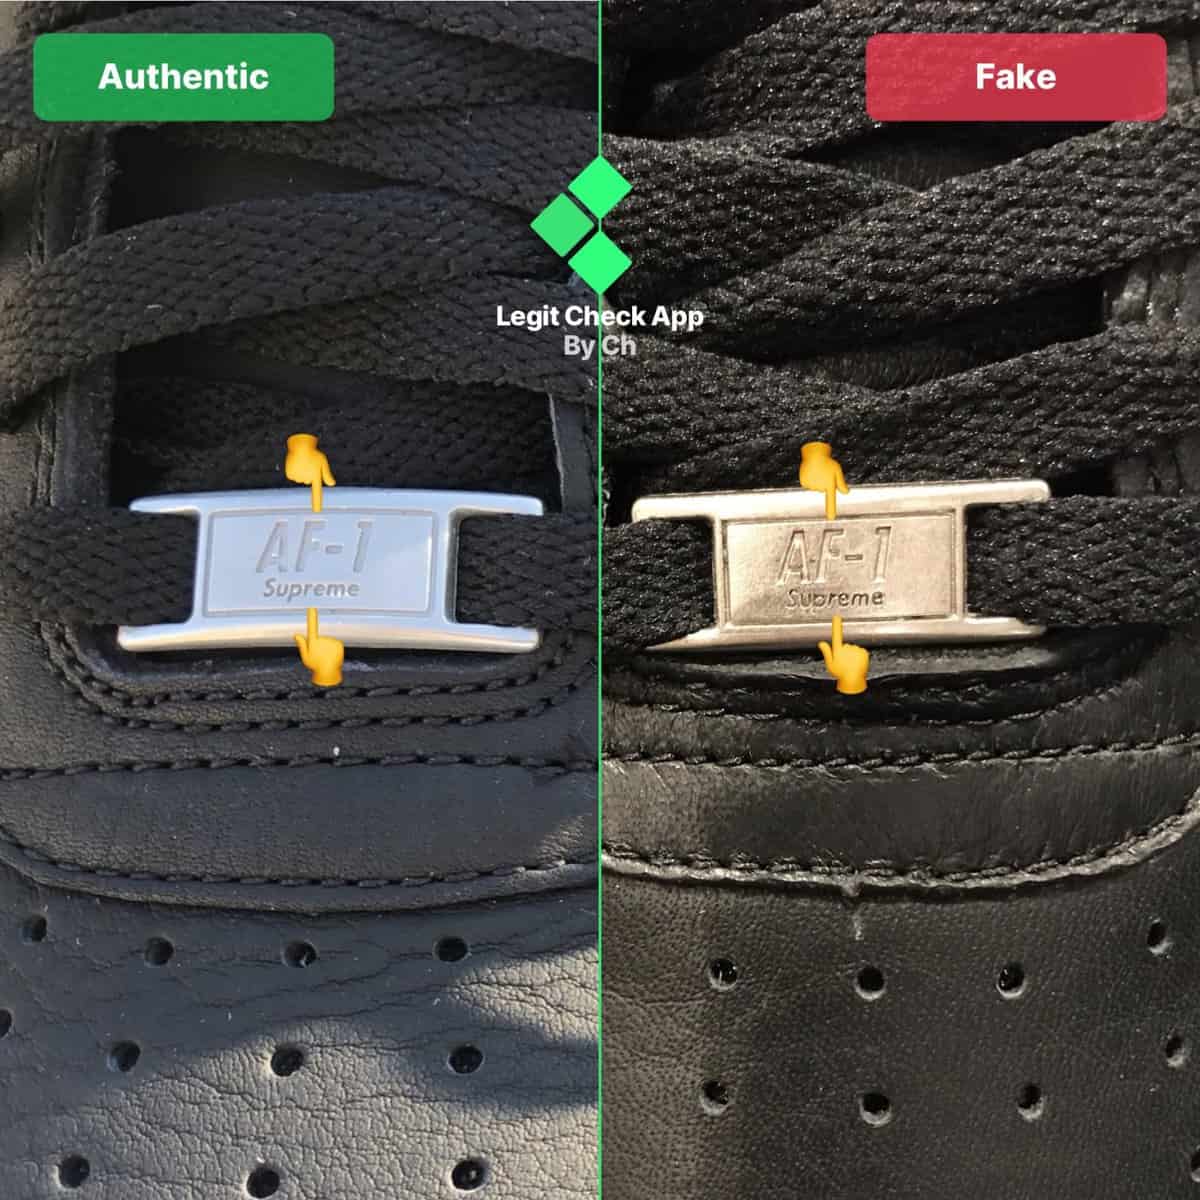 Nike Air Force 1 Supreme x CDG: How To Spot Fakes